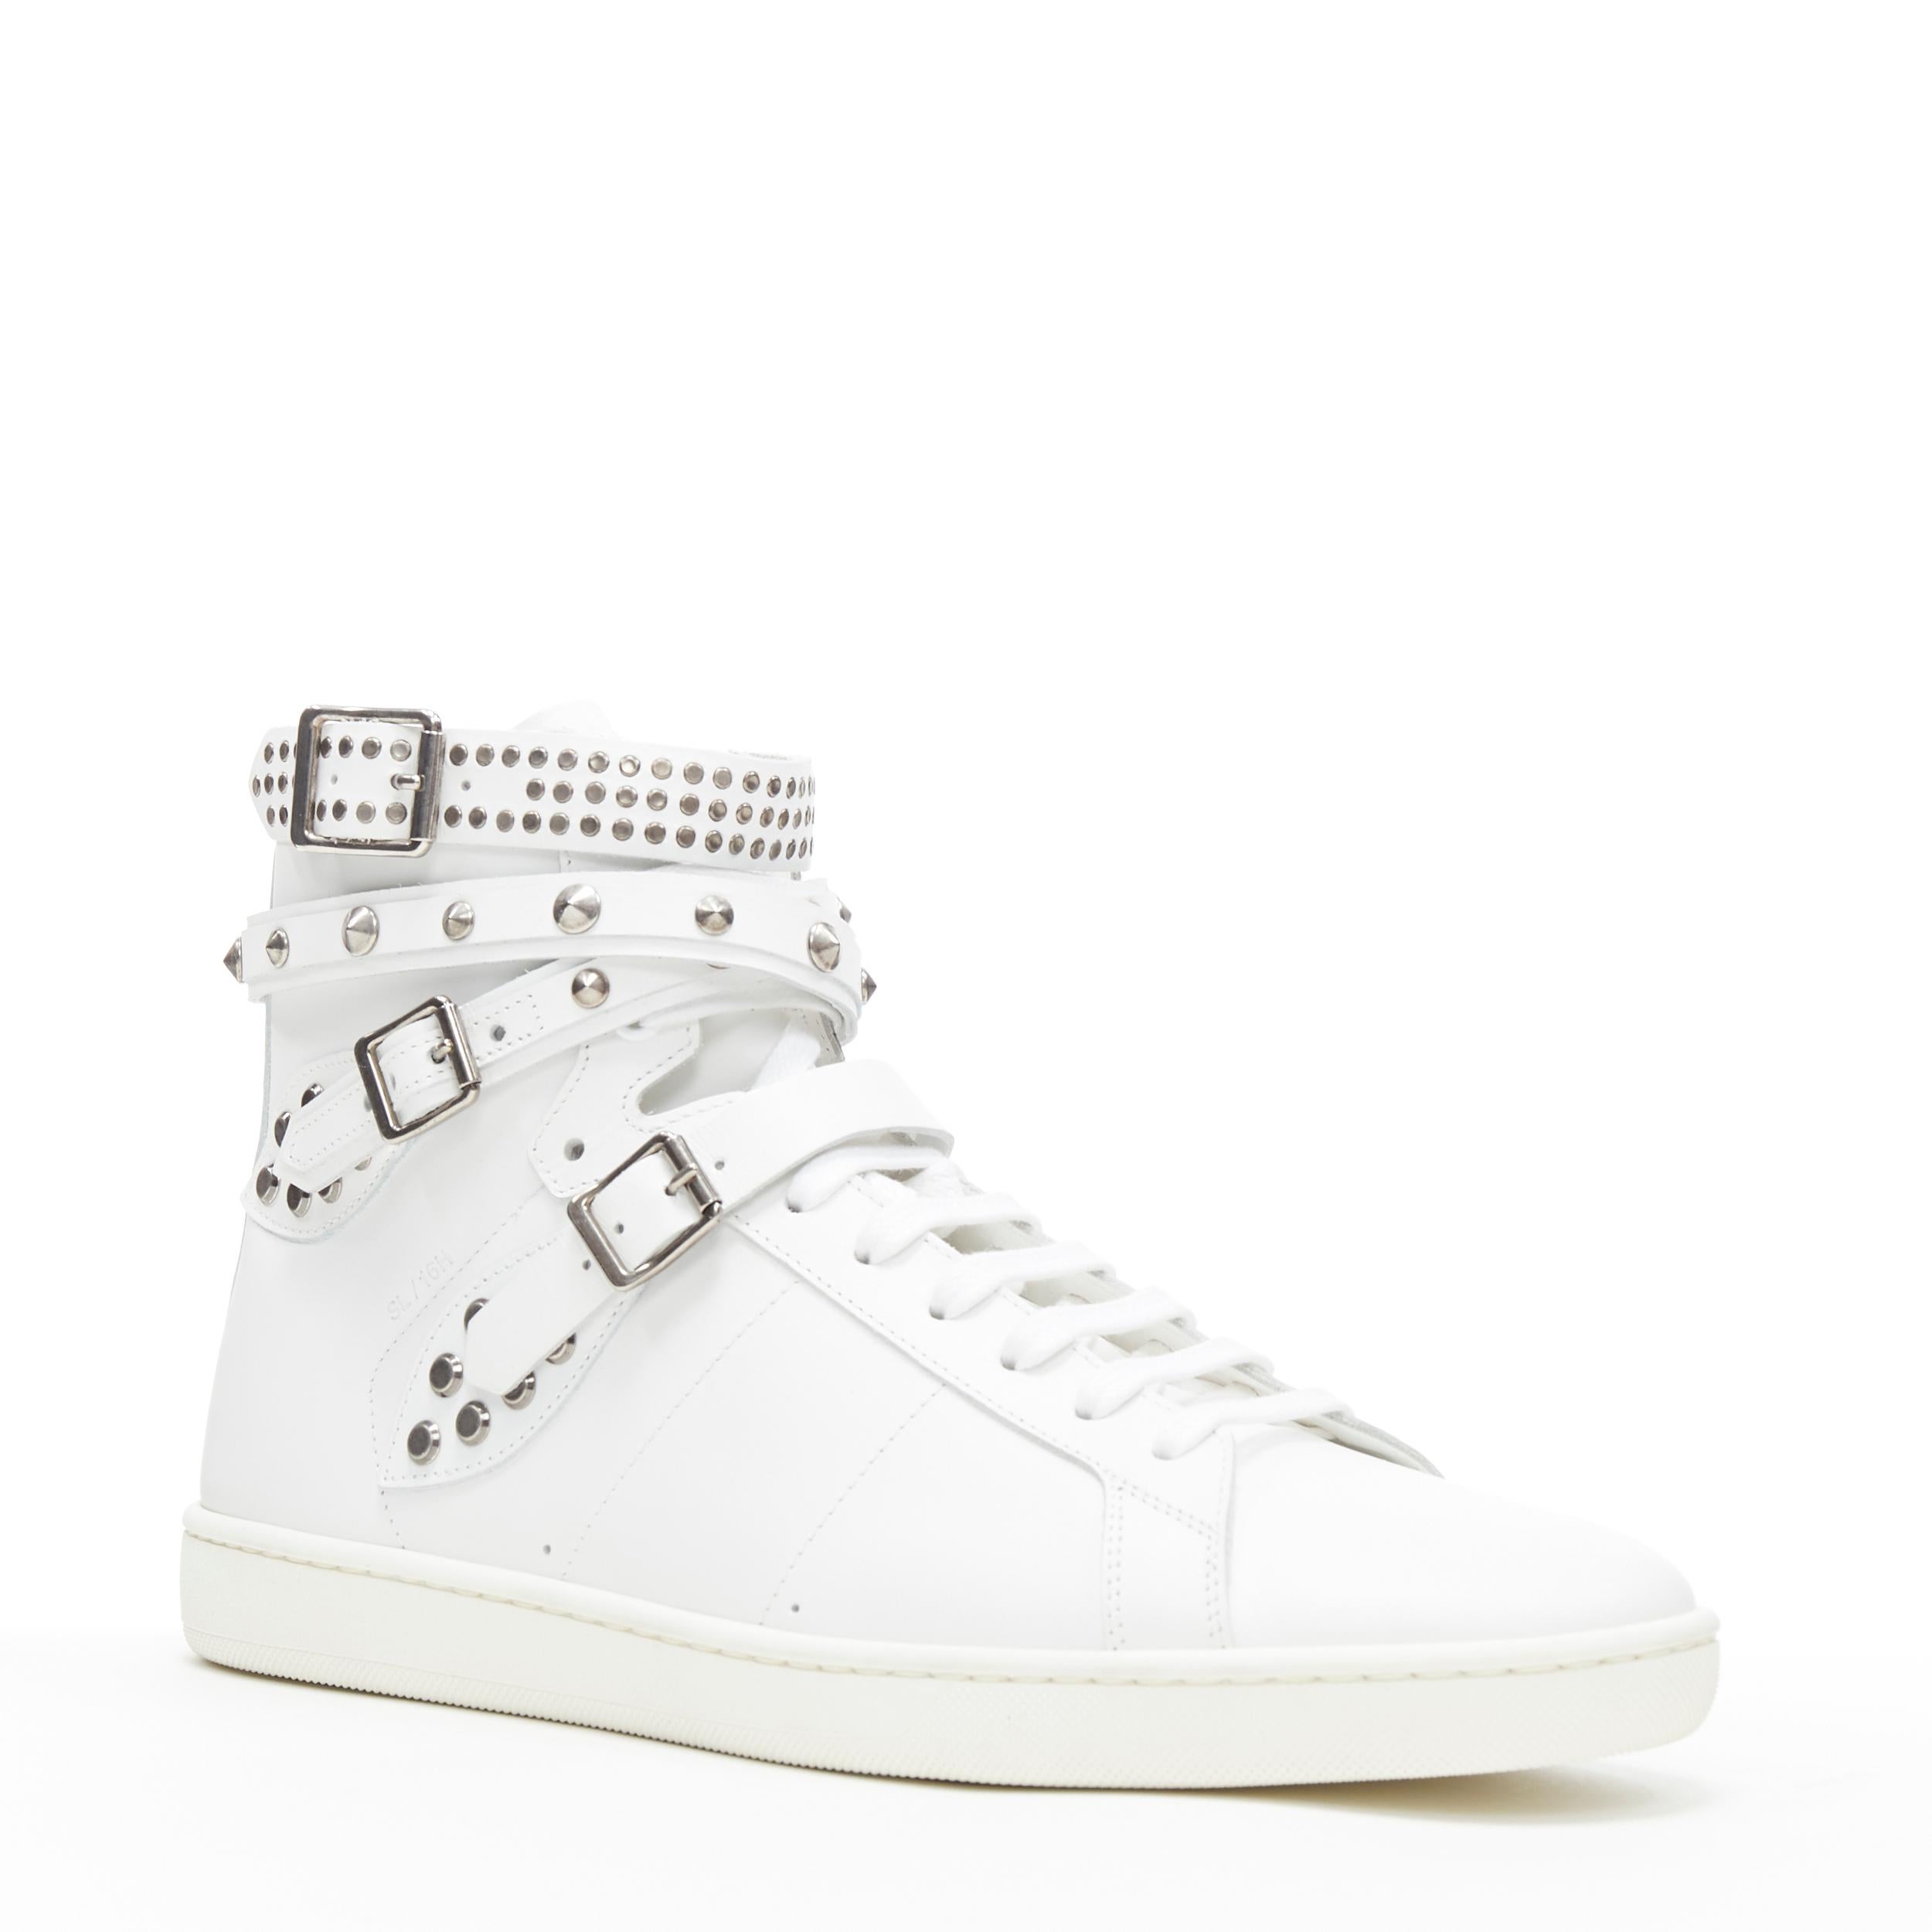 new SAINT LAURENT Court Classic SI16H white silver stud high top sneaker EU42
Brand: Saint Laurent
Model Name / Style: High top
Material: Silver
Color: White
Pattern: Solid
Closure: Lace up
Extra Detail: Court Classic SI16H High top  Round Toe.
Made